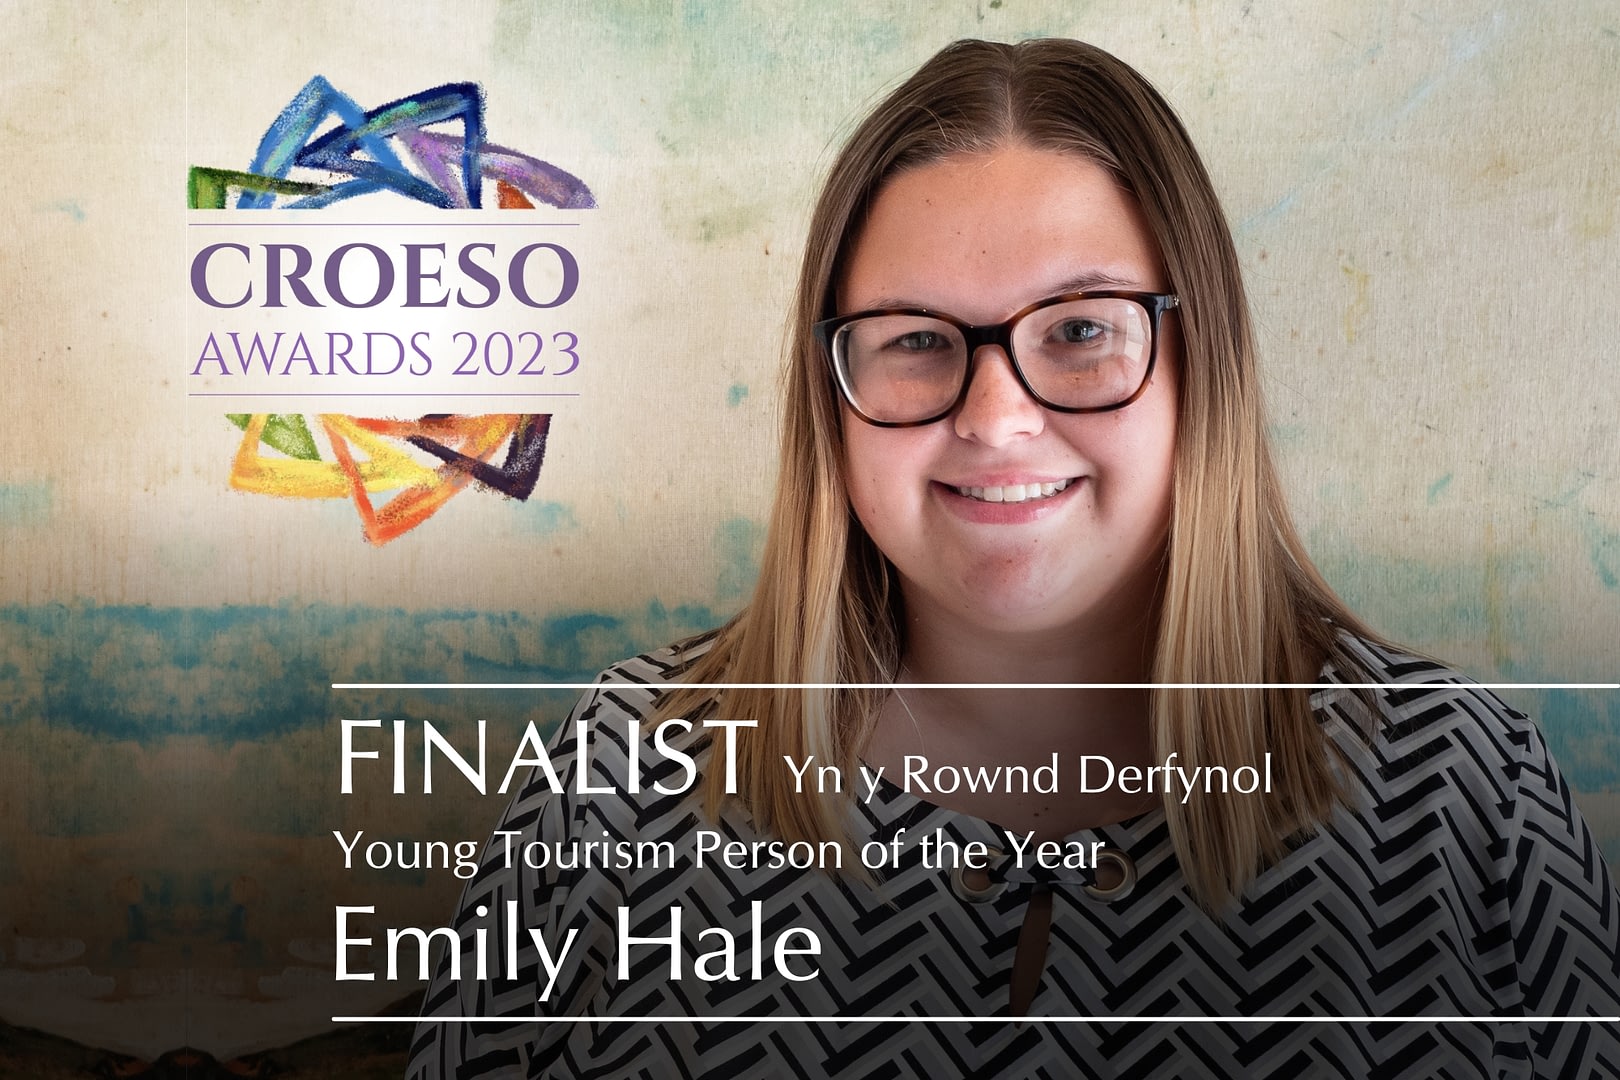 emily hale young person of the year croseo awards